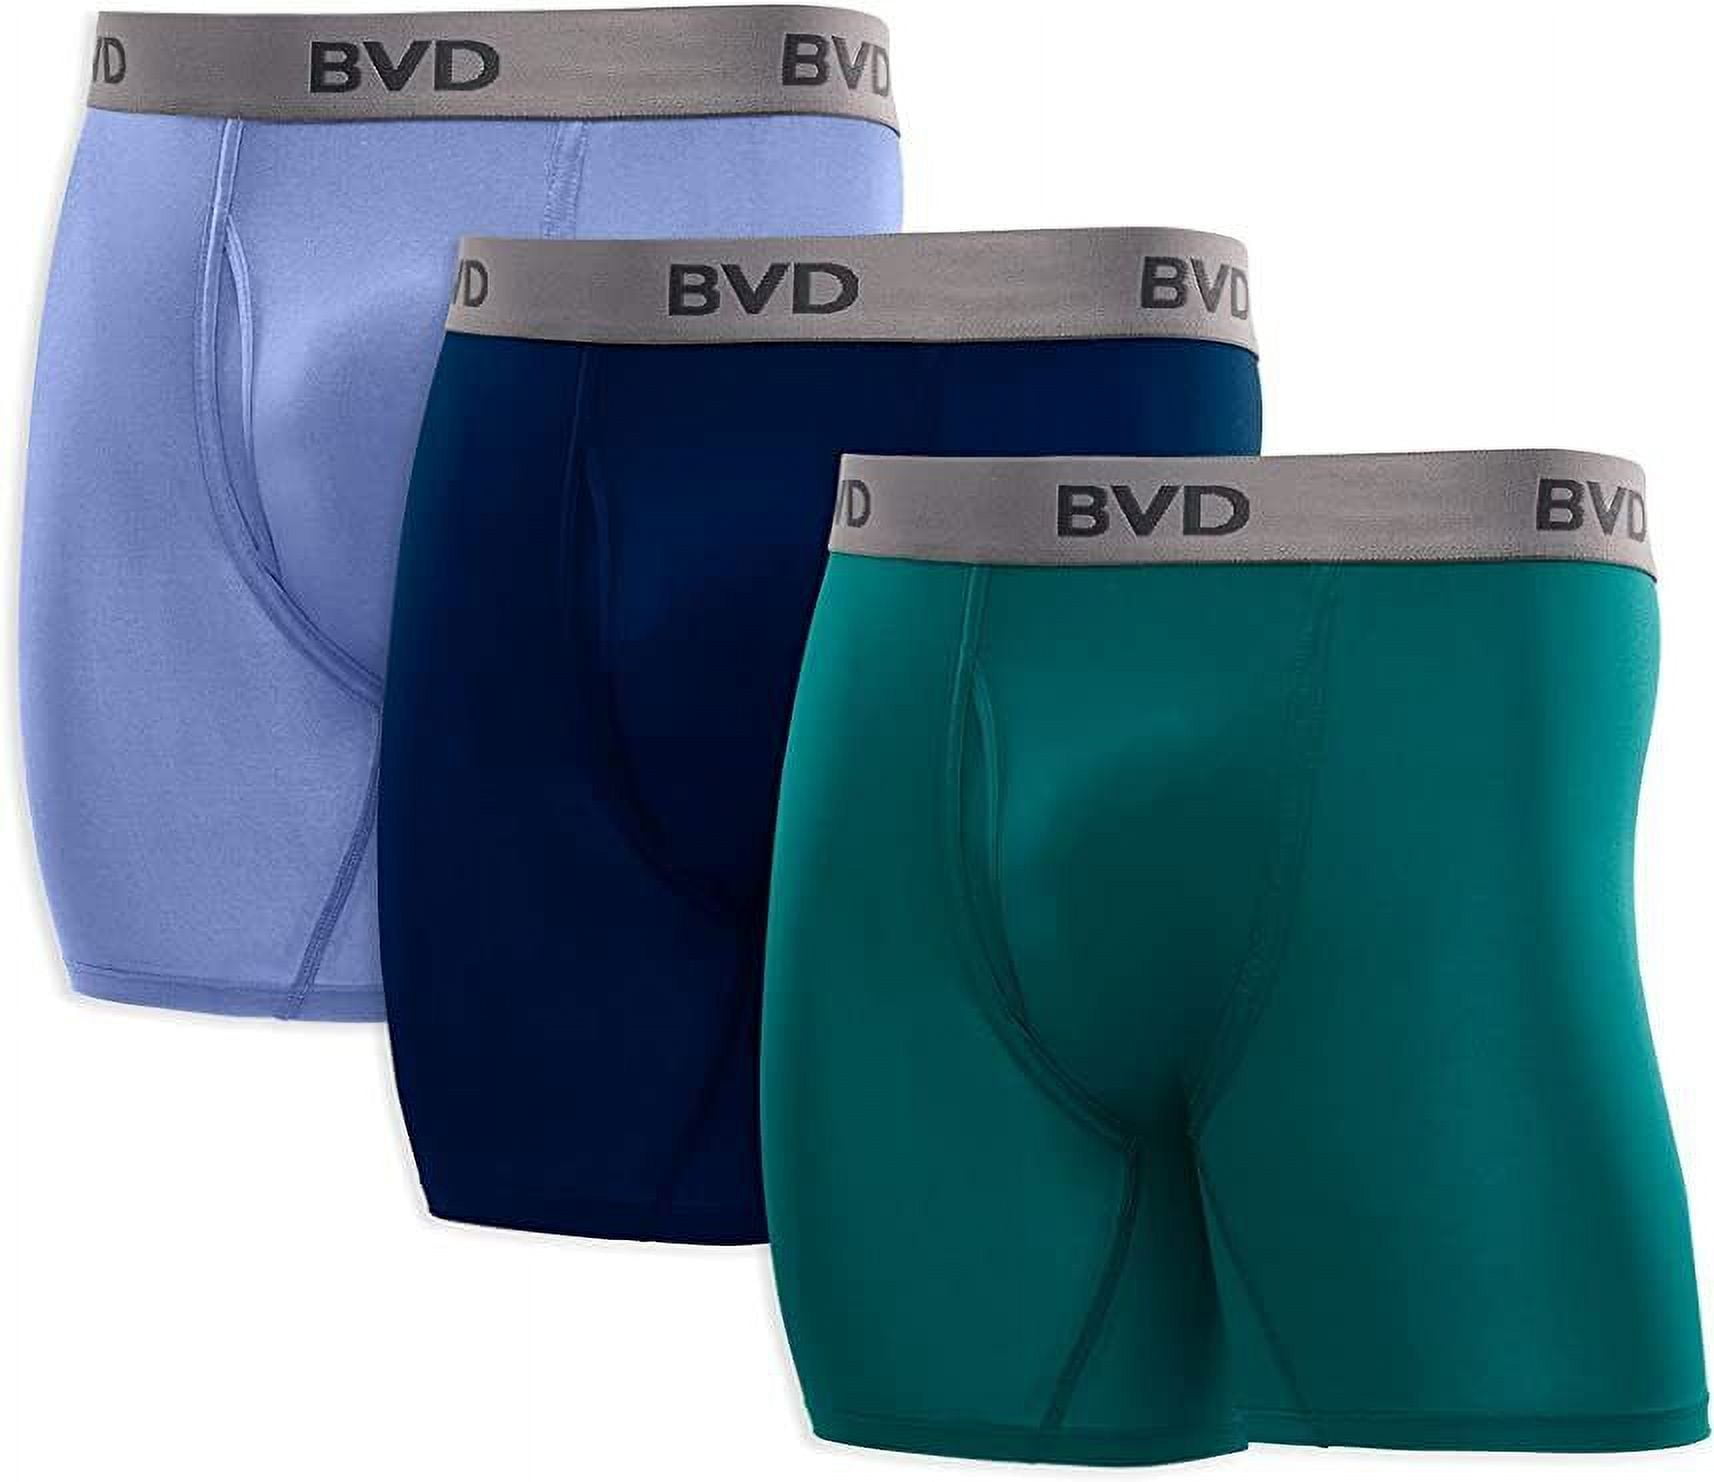 BVD 3 Pack Men’s Microfiber Boxer Briefs (Cooling Fabric & Odor Protection)